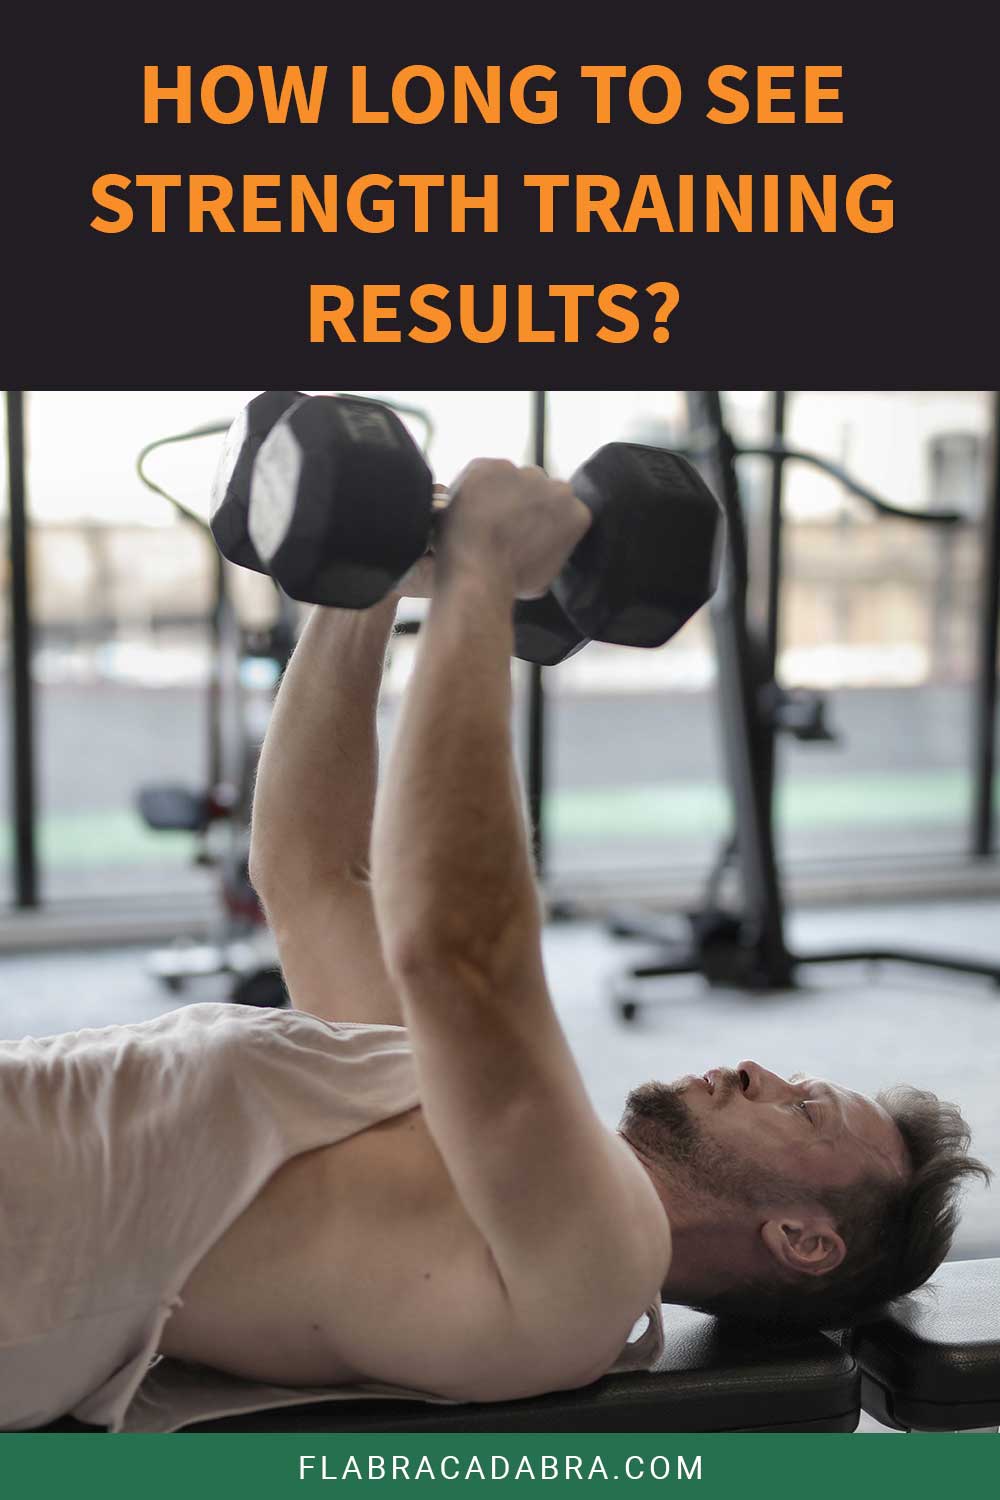 How Long to See Strength Training Results?